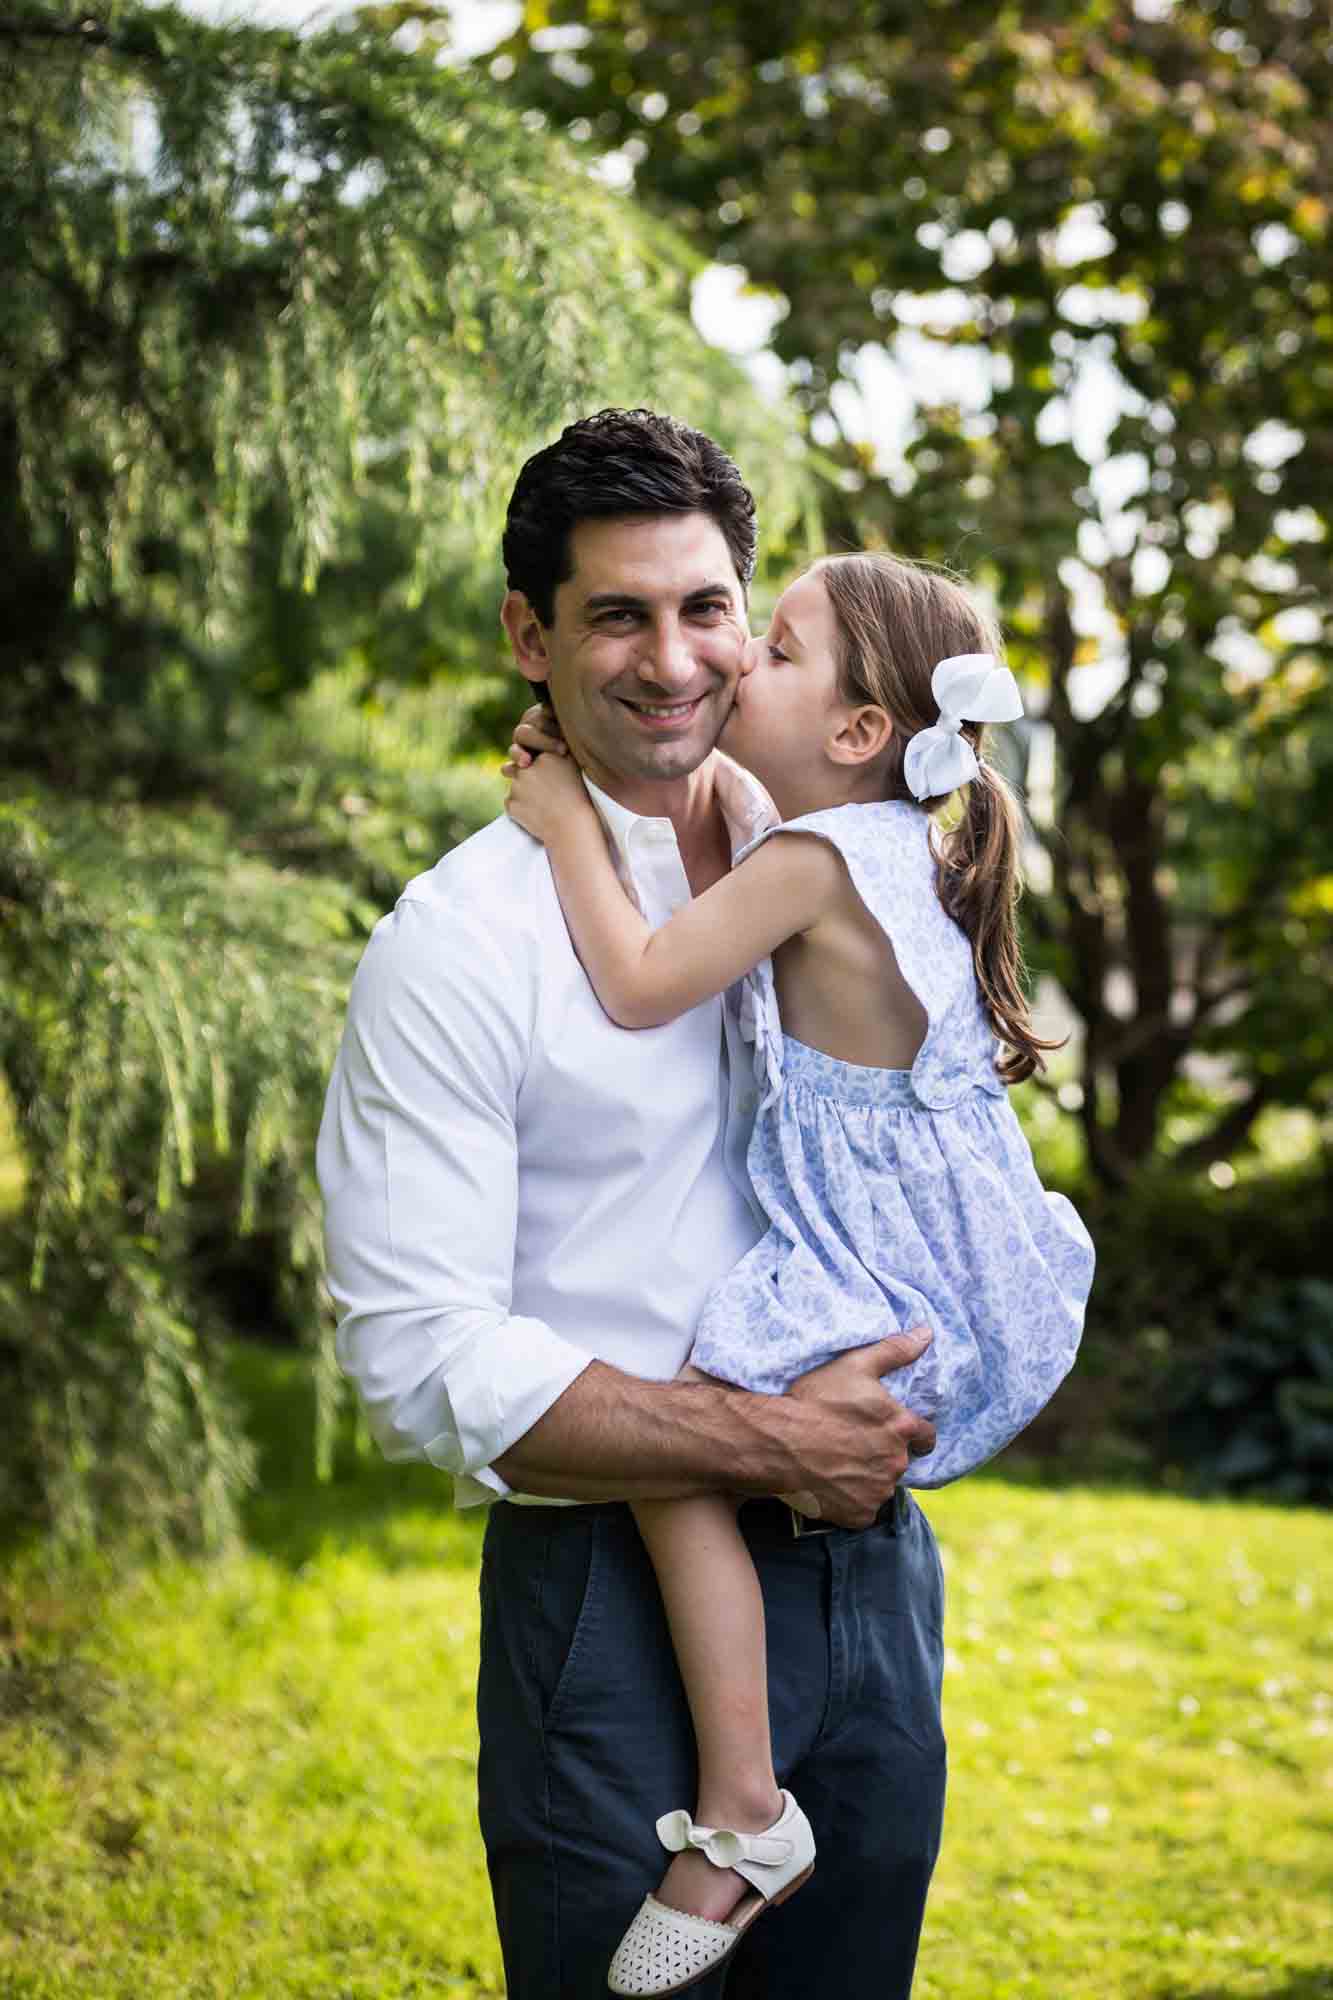 Man wearing white shirt holding little girl in front of trees during a Narrows Botanical Gardens family portrait session